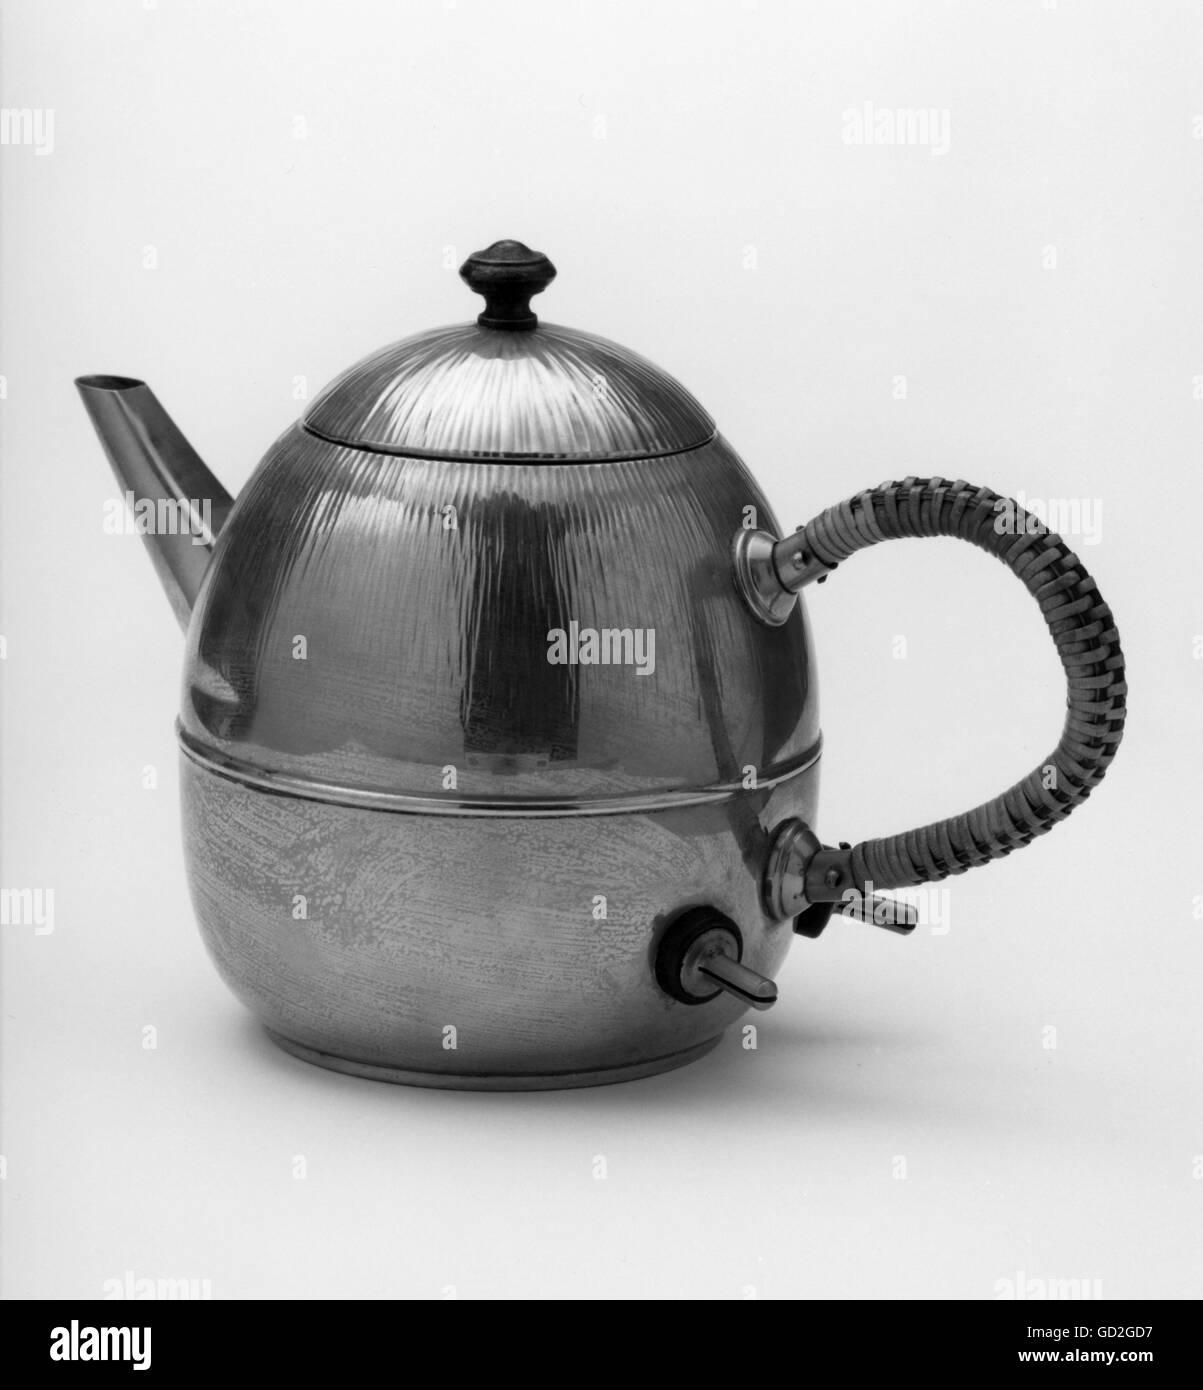 https://c8.alamy.com/comp/GD2GD7/household-kitchen-and-kitchenware-tea-kettle-circa-1908-additional-GD2GD7.jpg